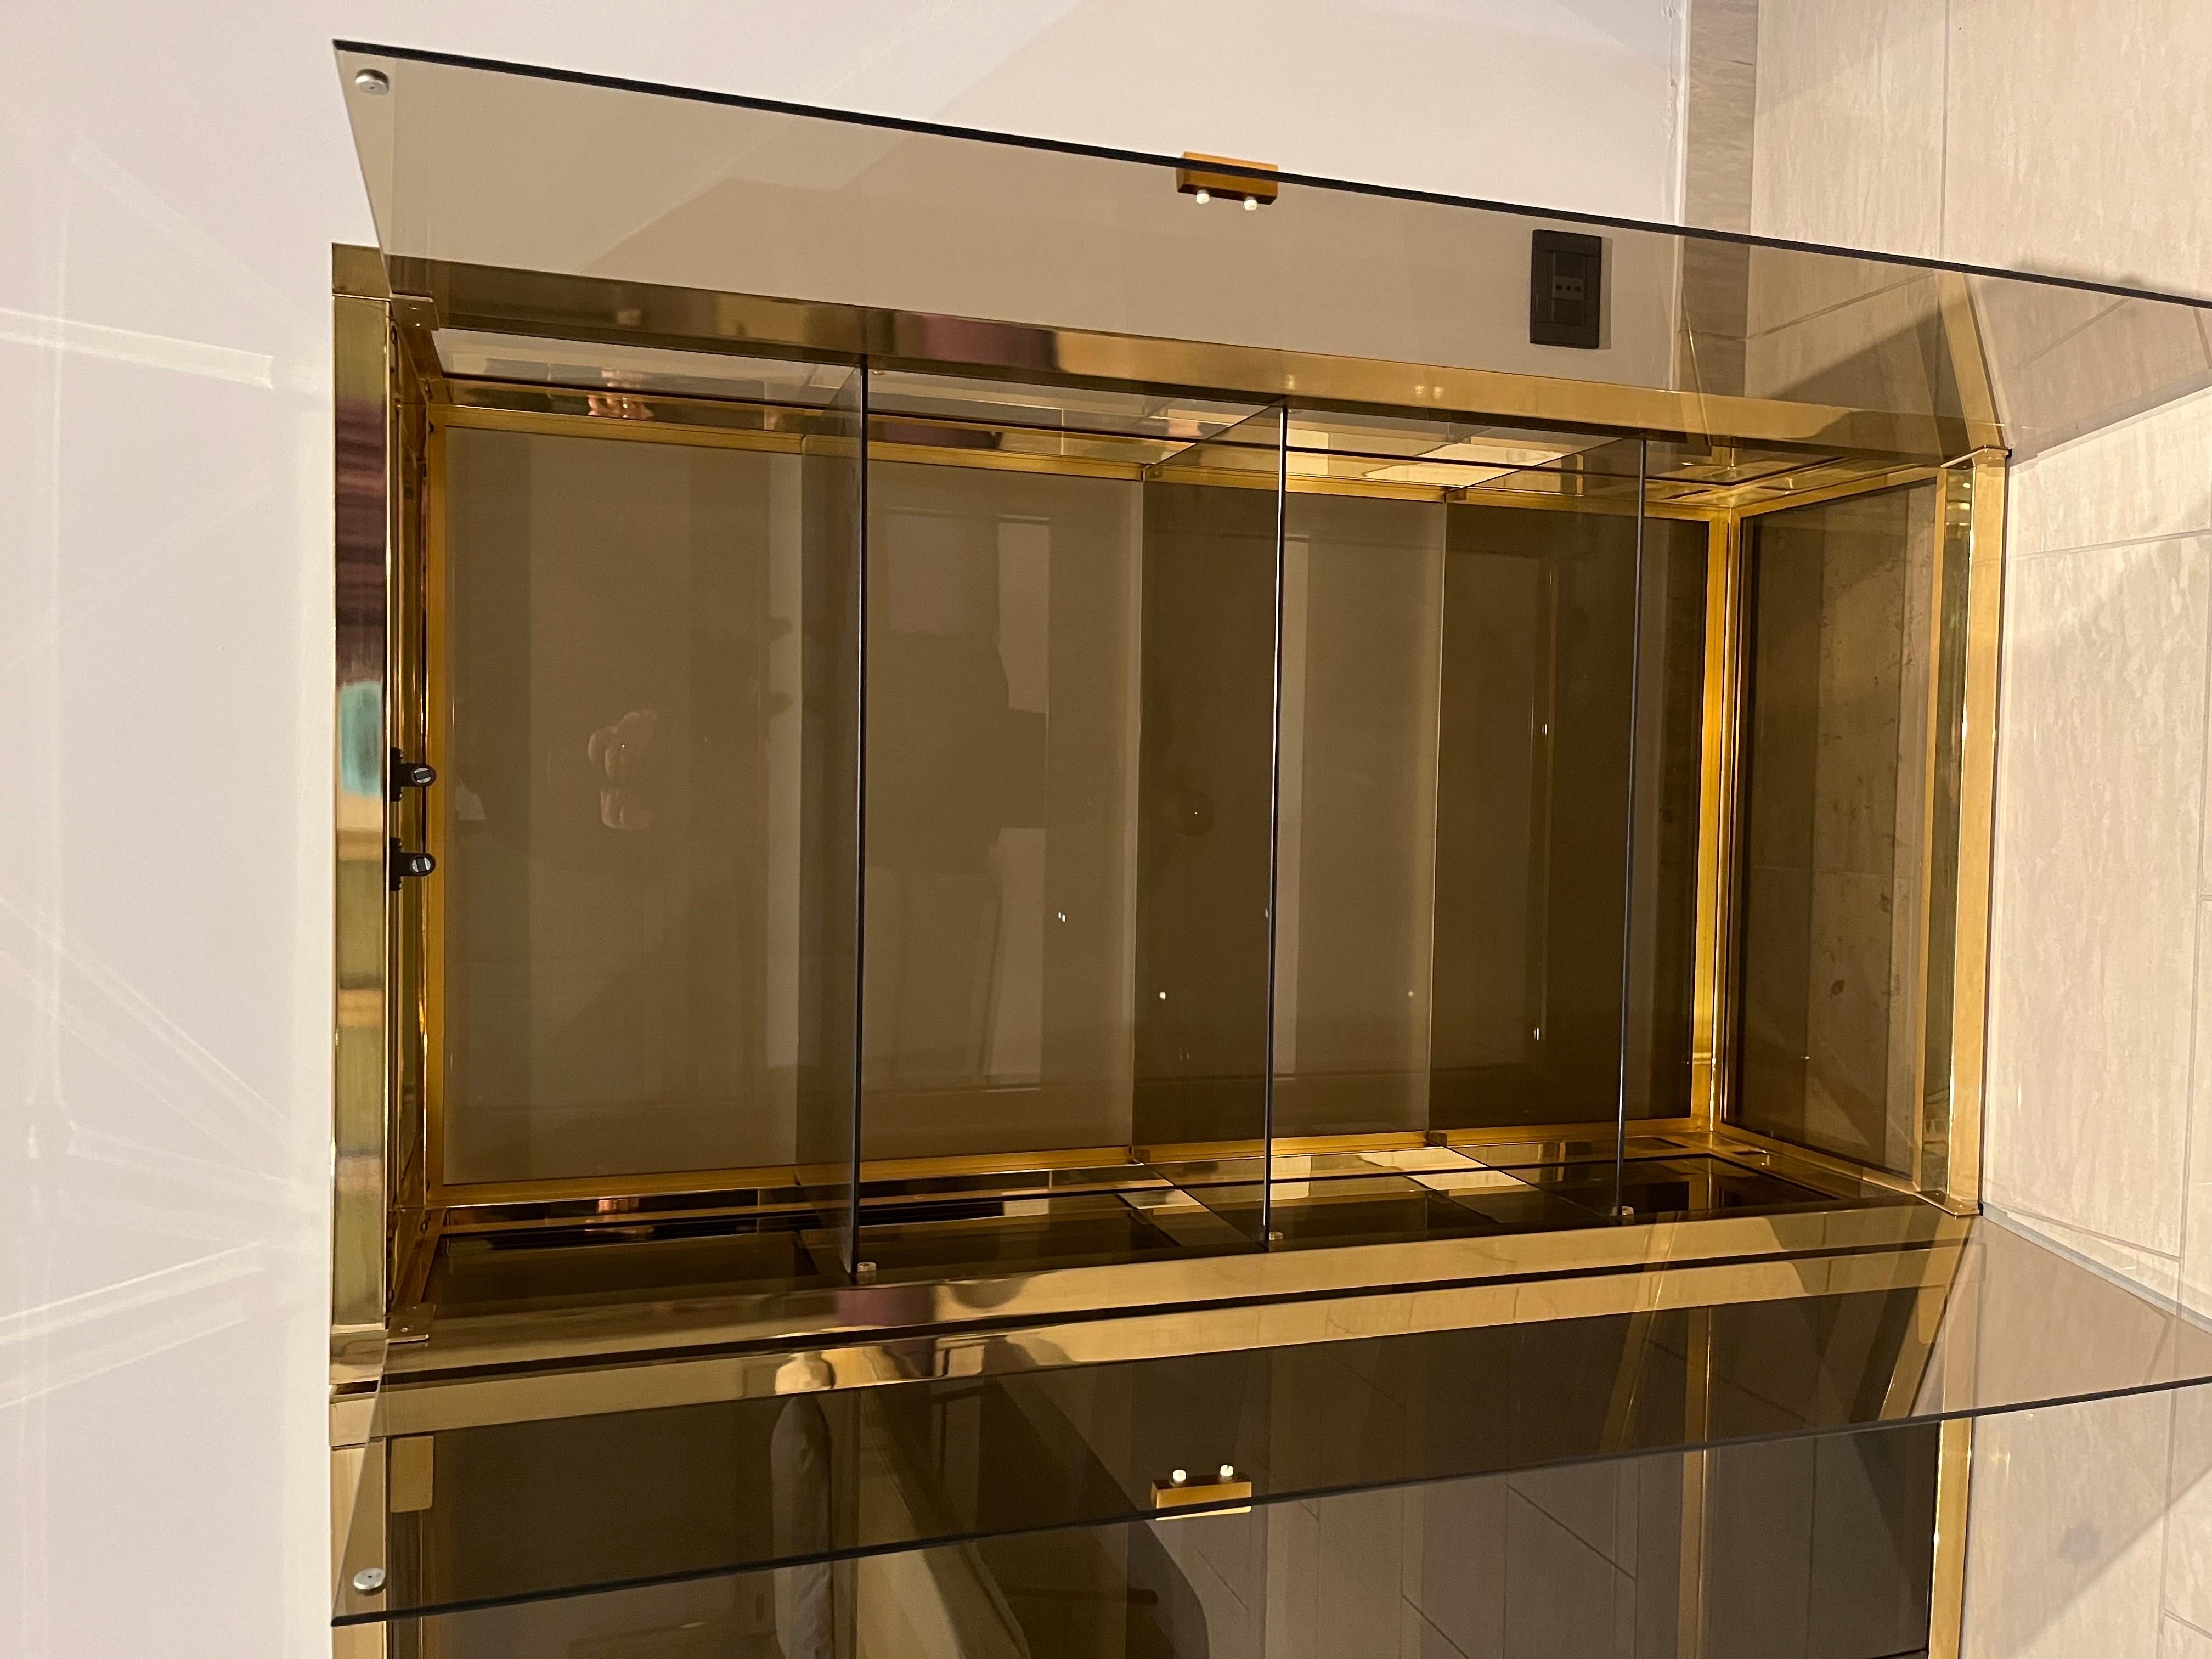 Pair of Zevi showcases in brass with smoked glass

Very good state of conservation, original top design from the 70s

Functional, original and chic.